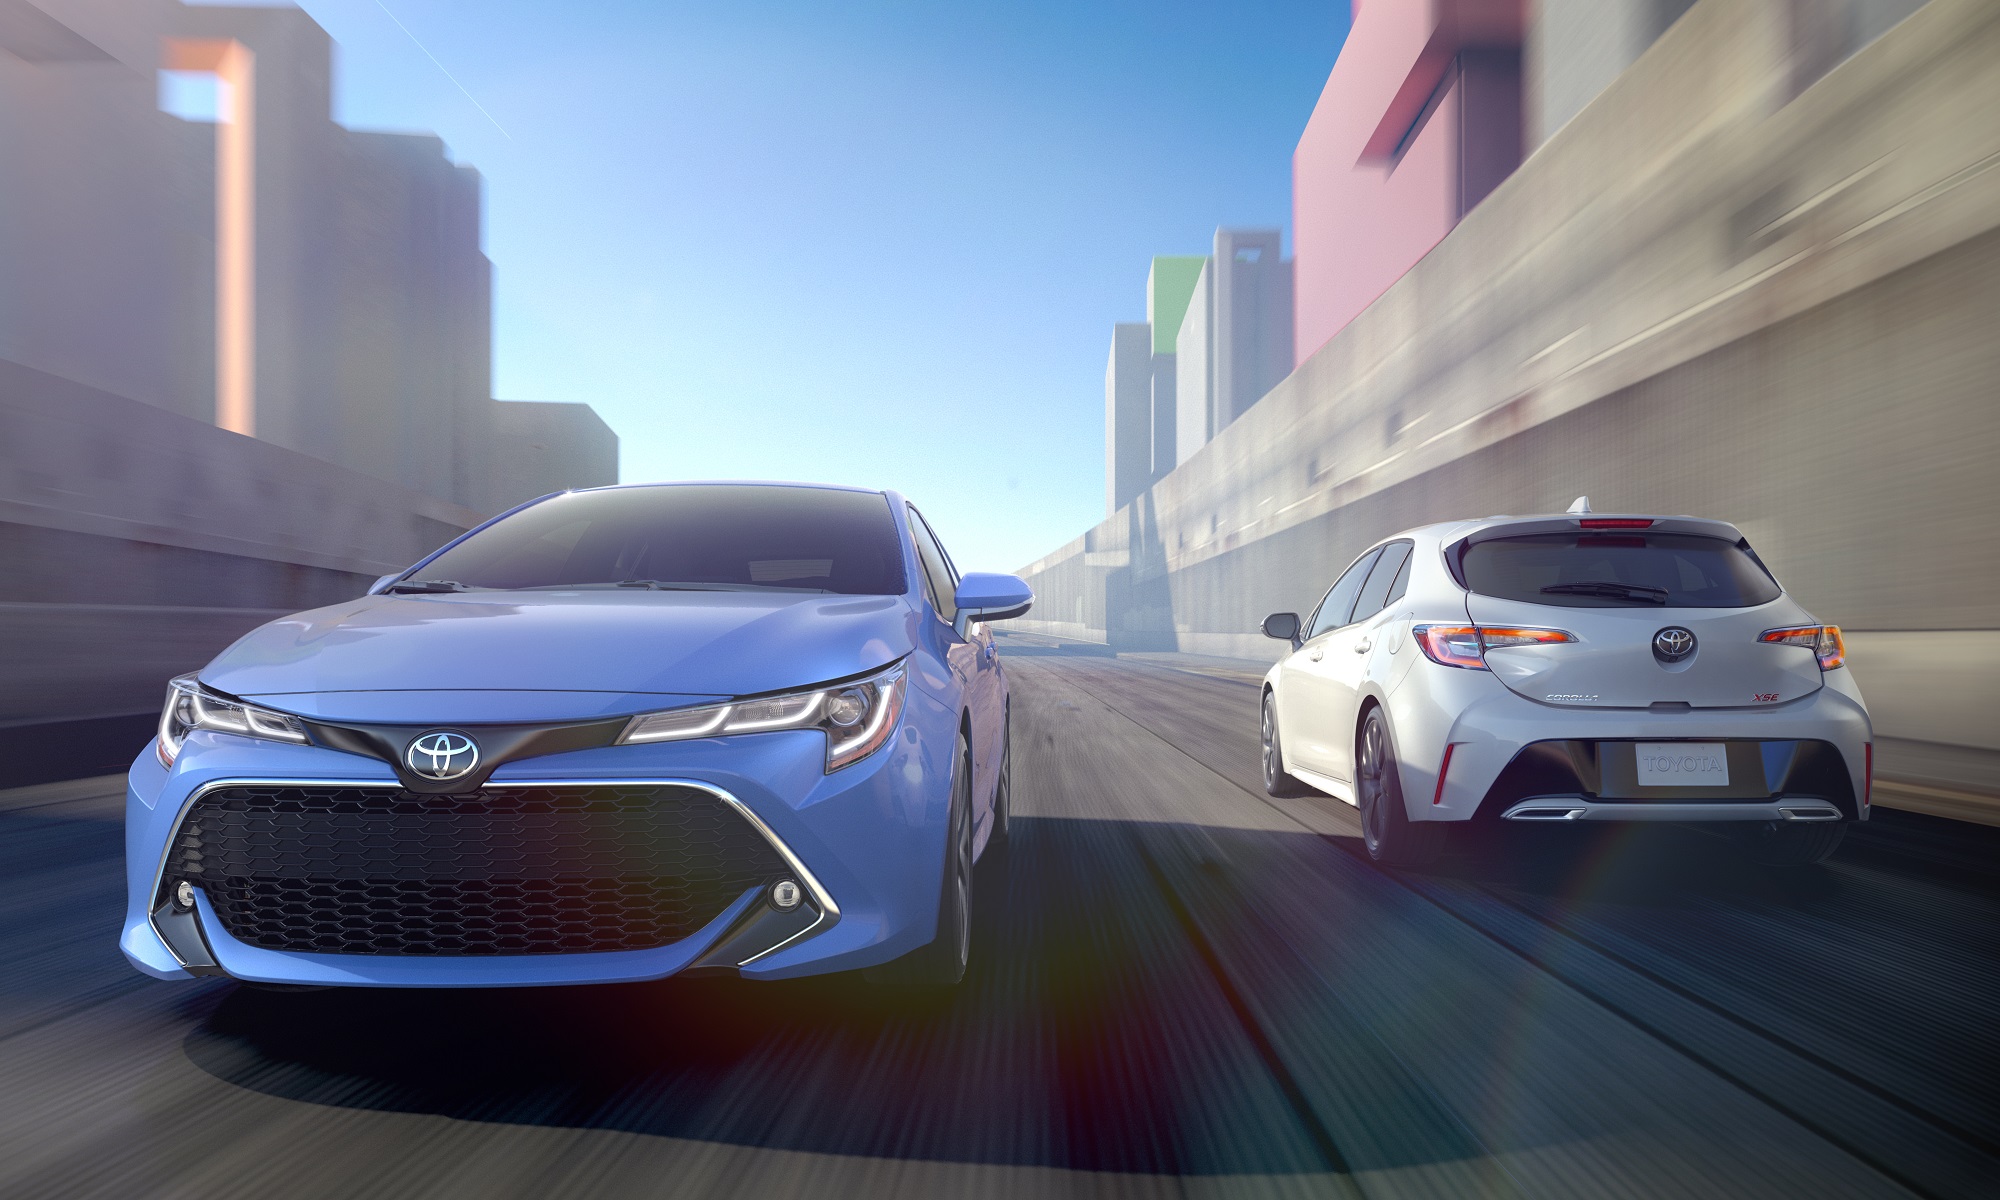 The Hatch is Back! 2019 Toyota Corolla is an Amazing Sight to Behold